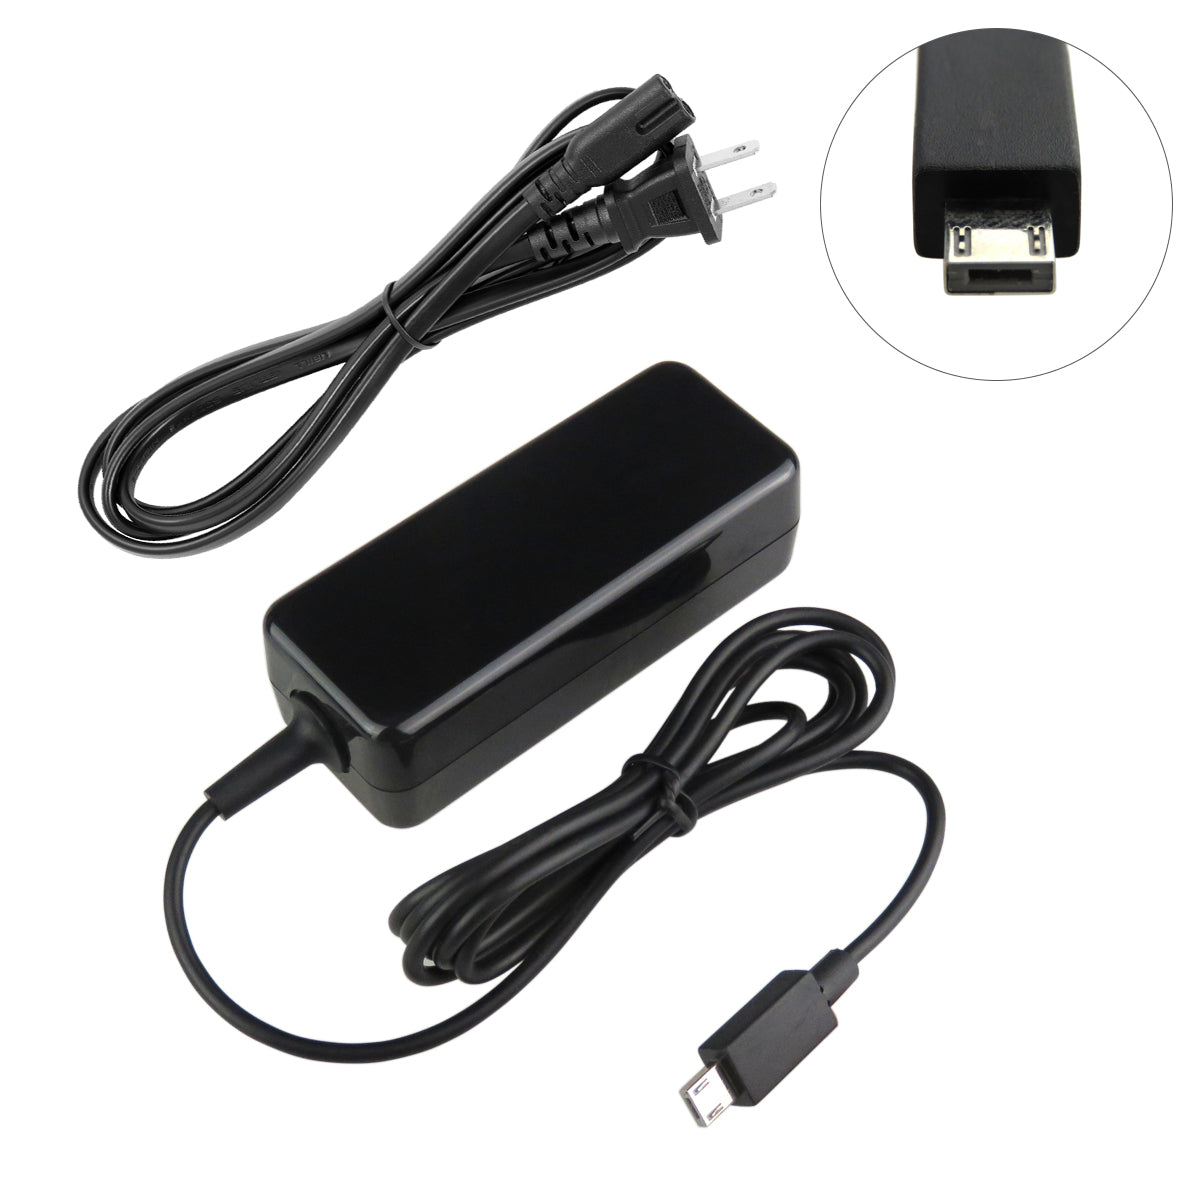 Charger for ASUS EeeBook X205TA-US01-BL Laptop.